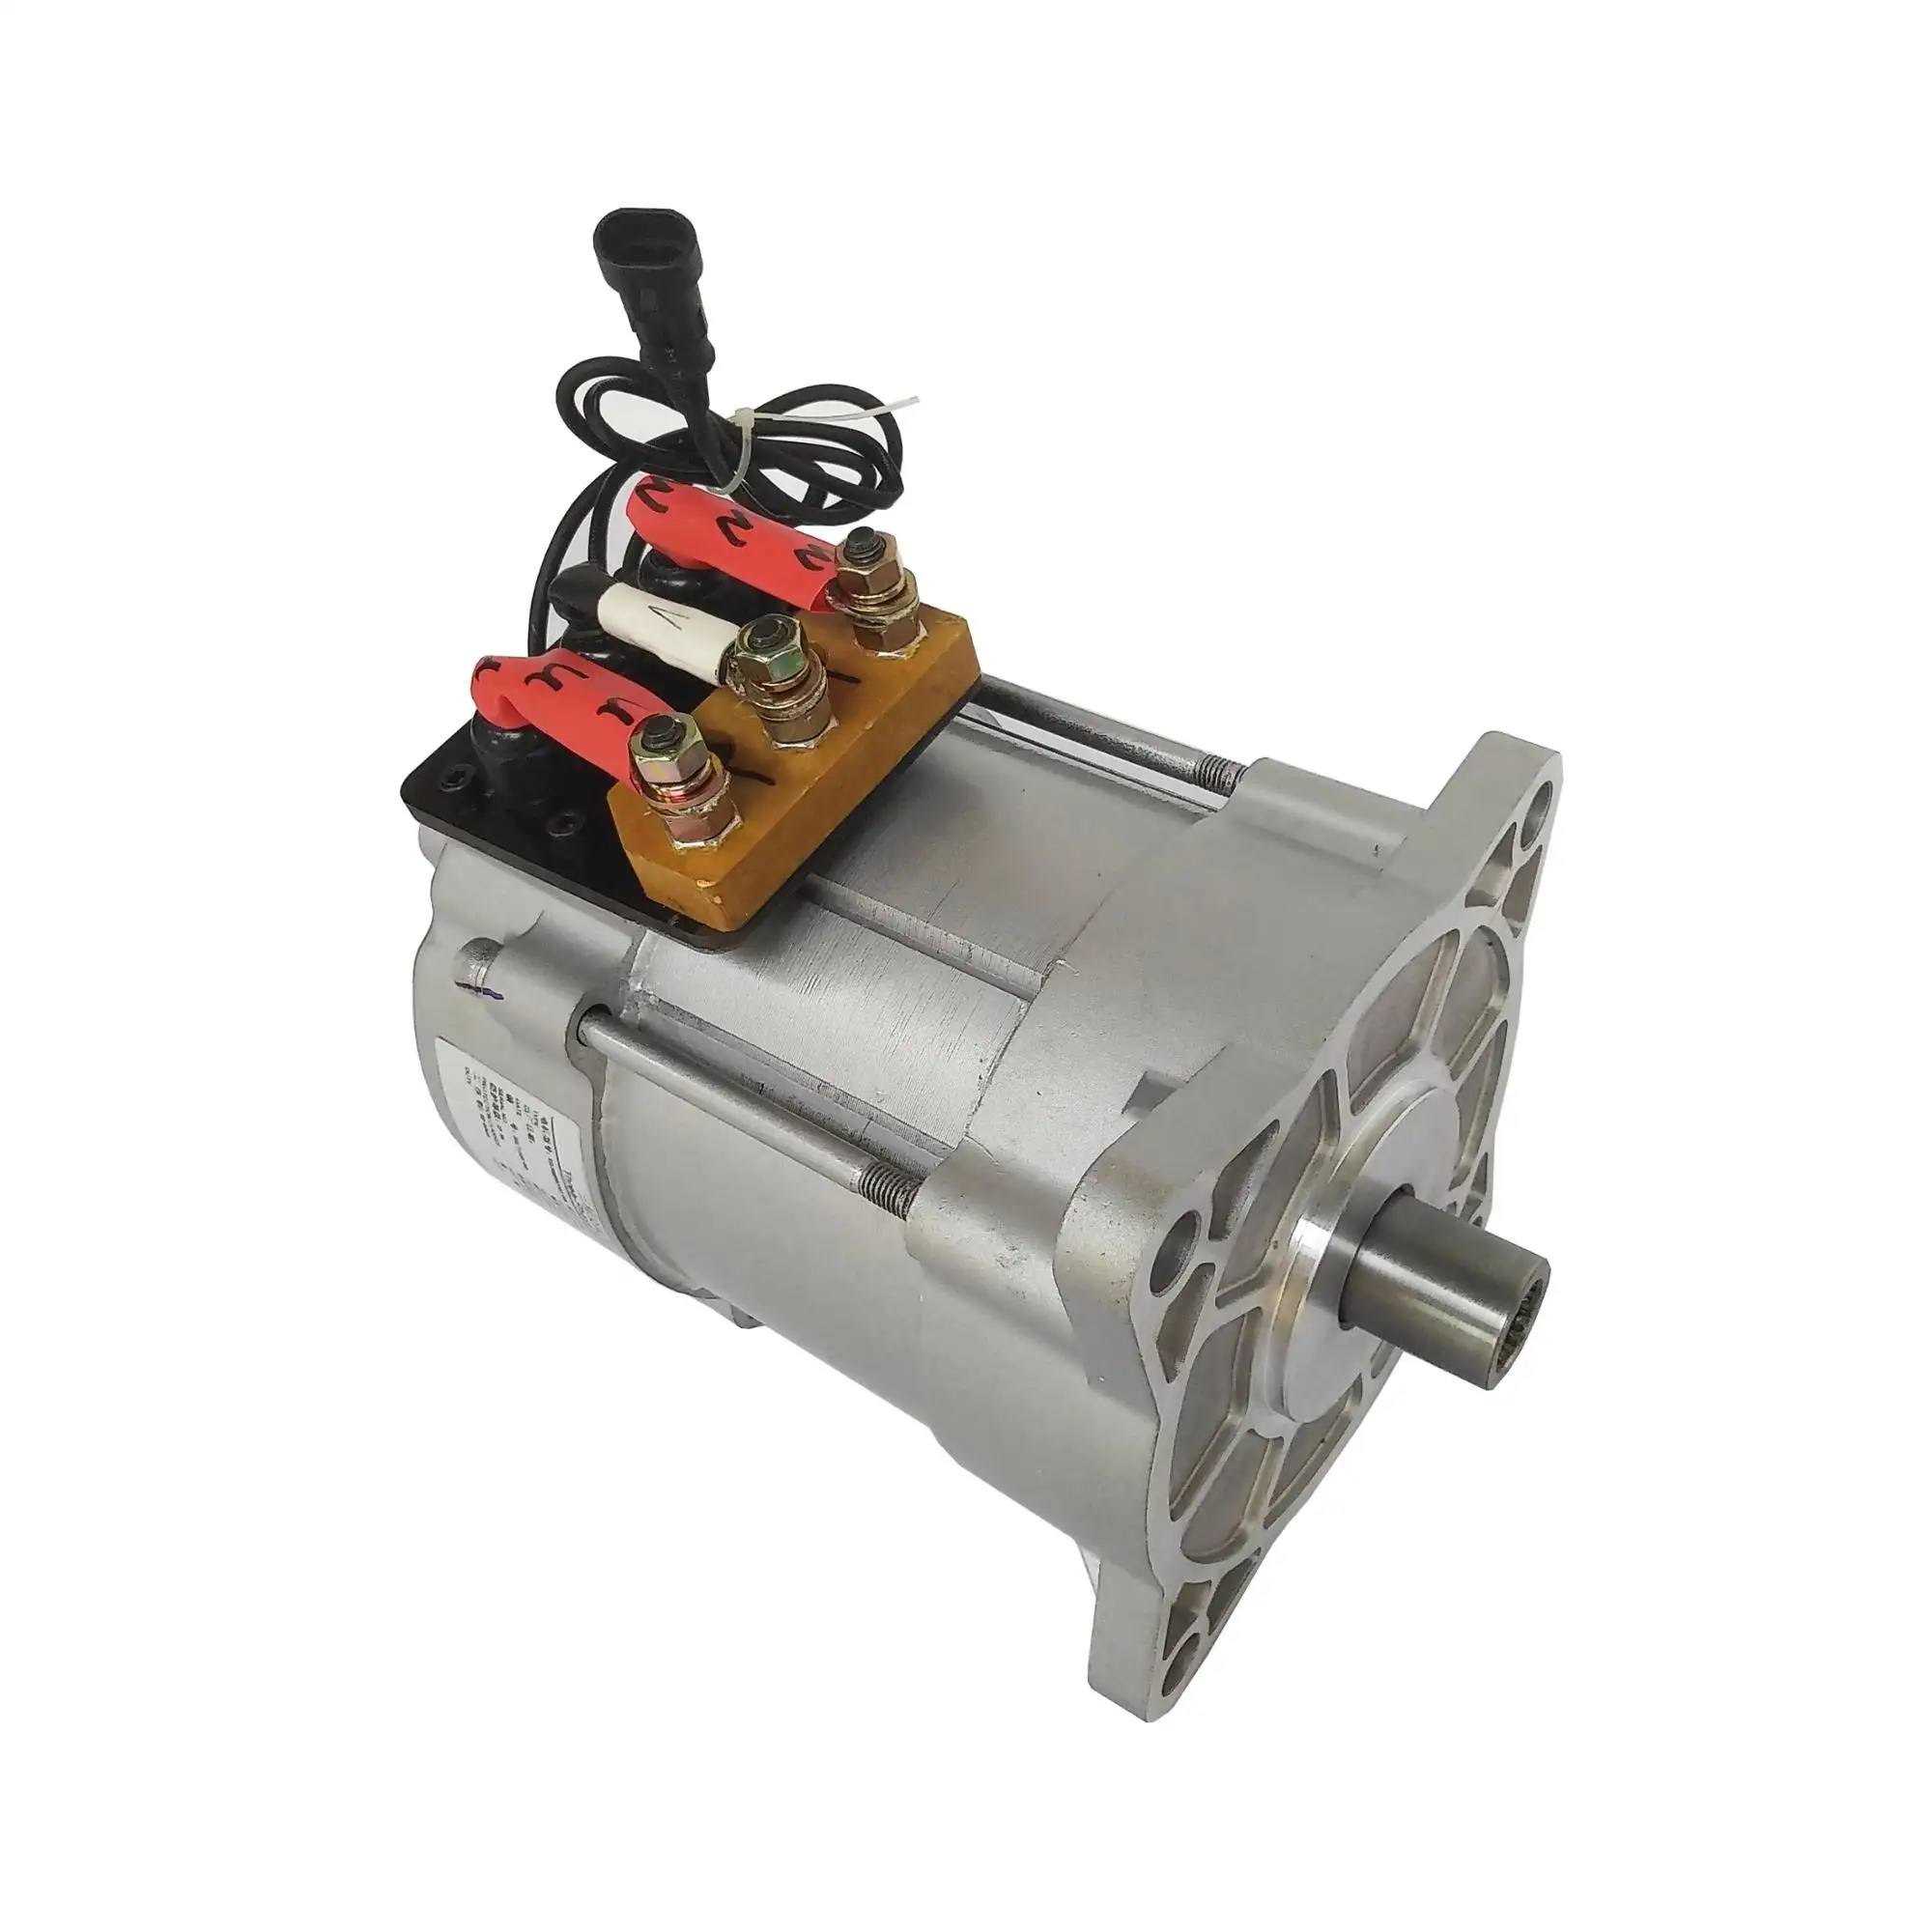 traction motor for electric vehicle 144v 20kW electric motor controller battery modified gasoline car to electric car 15 kw pmsm